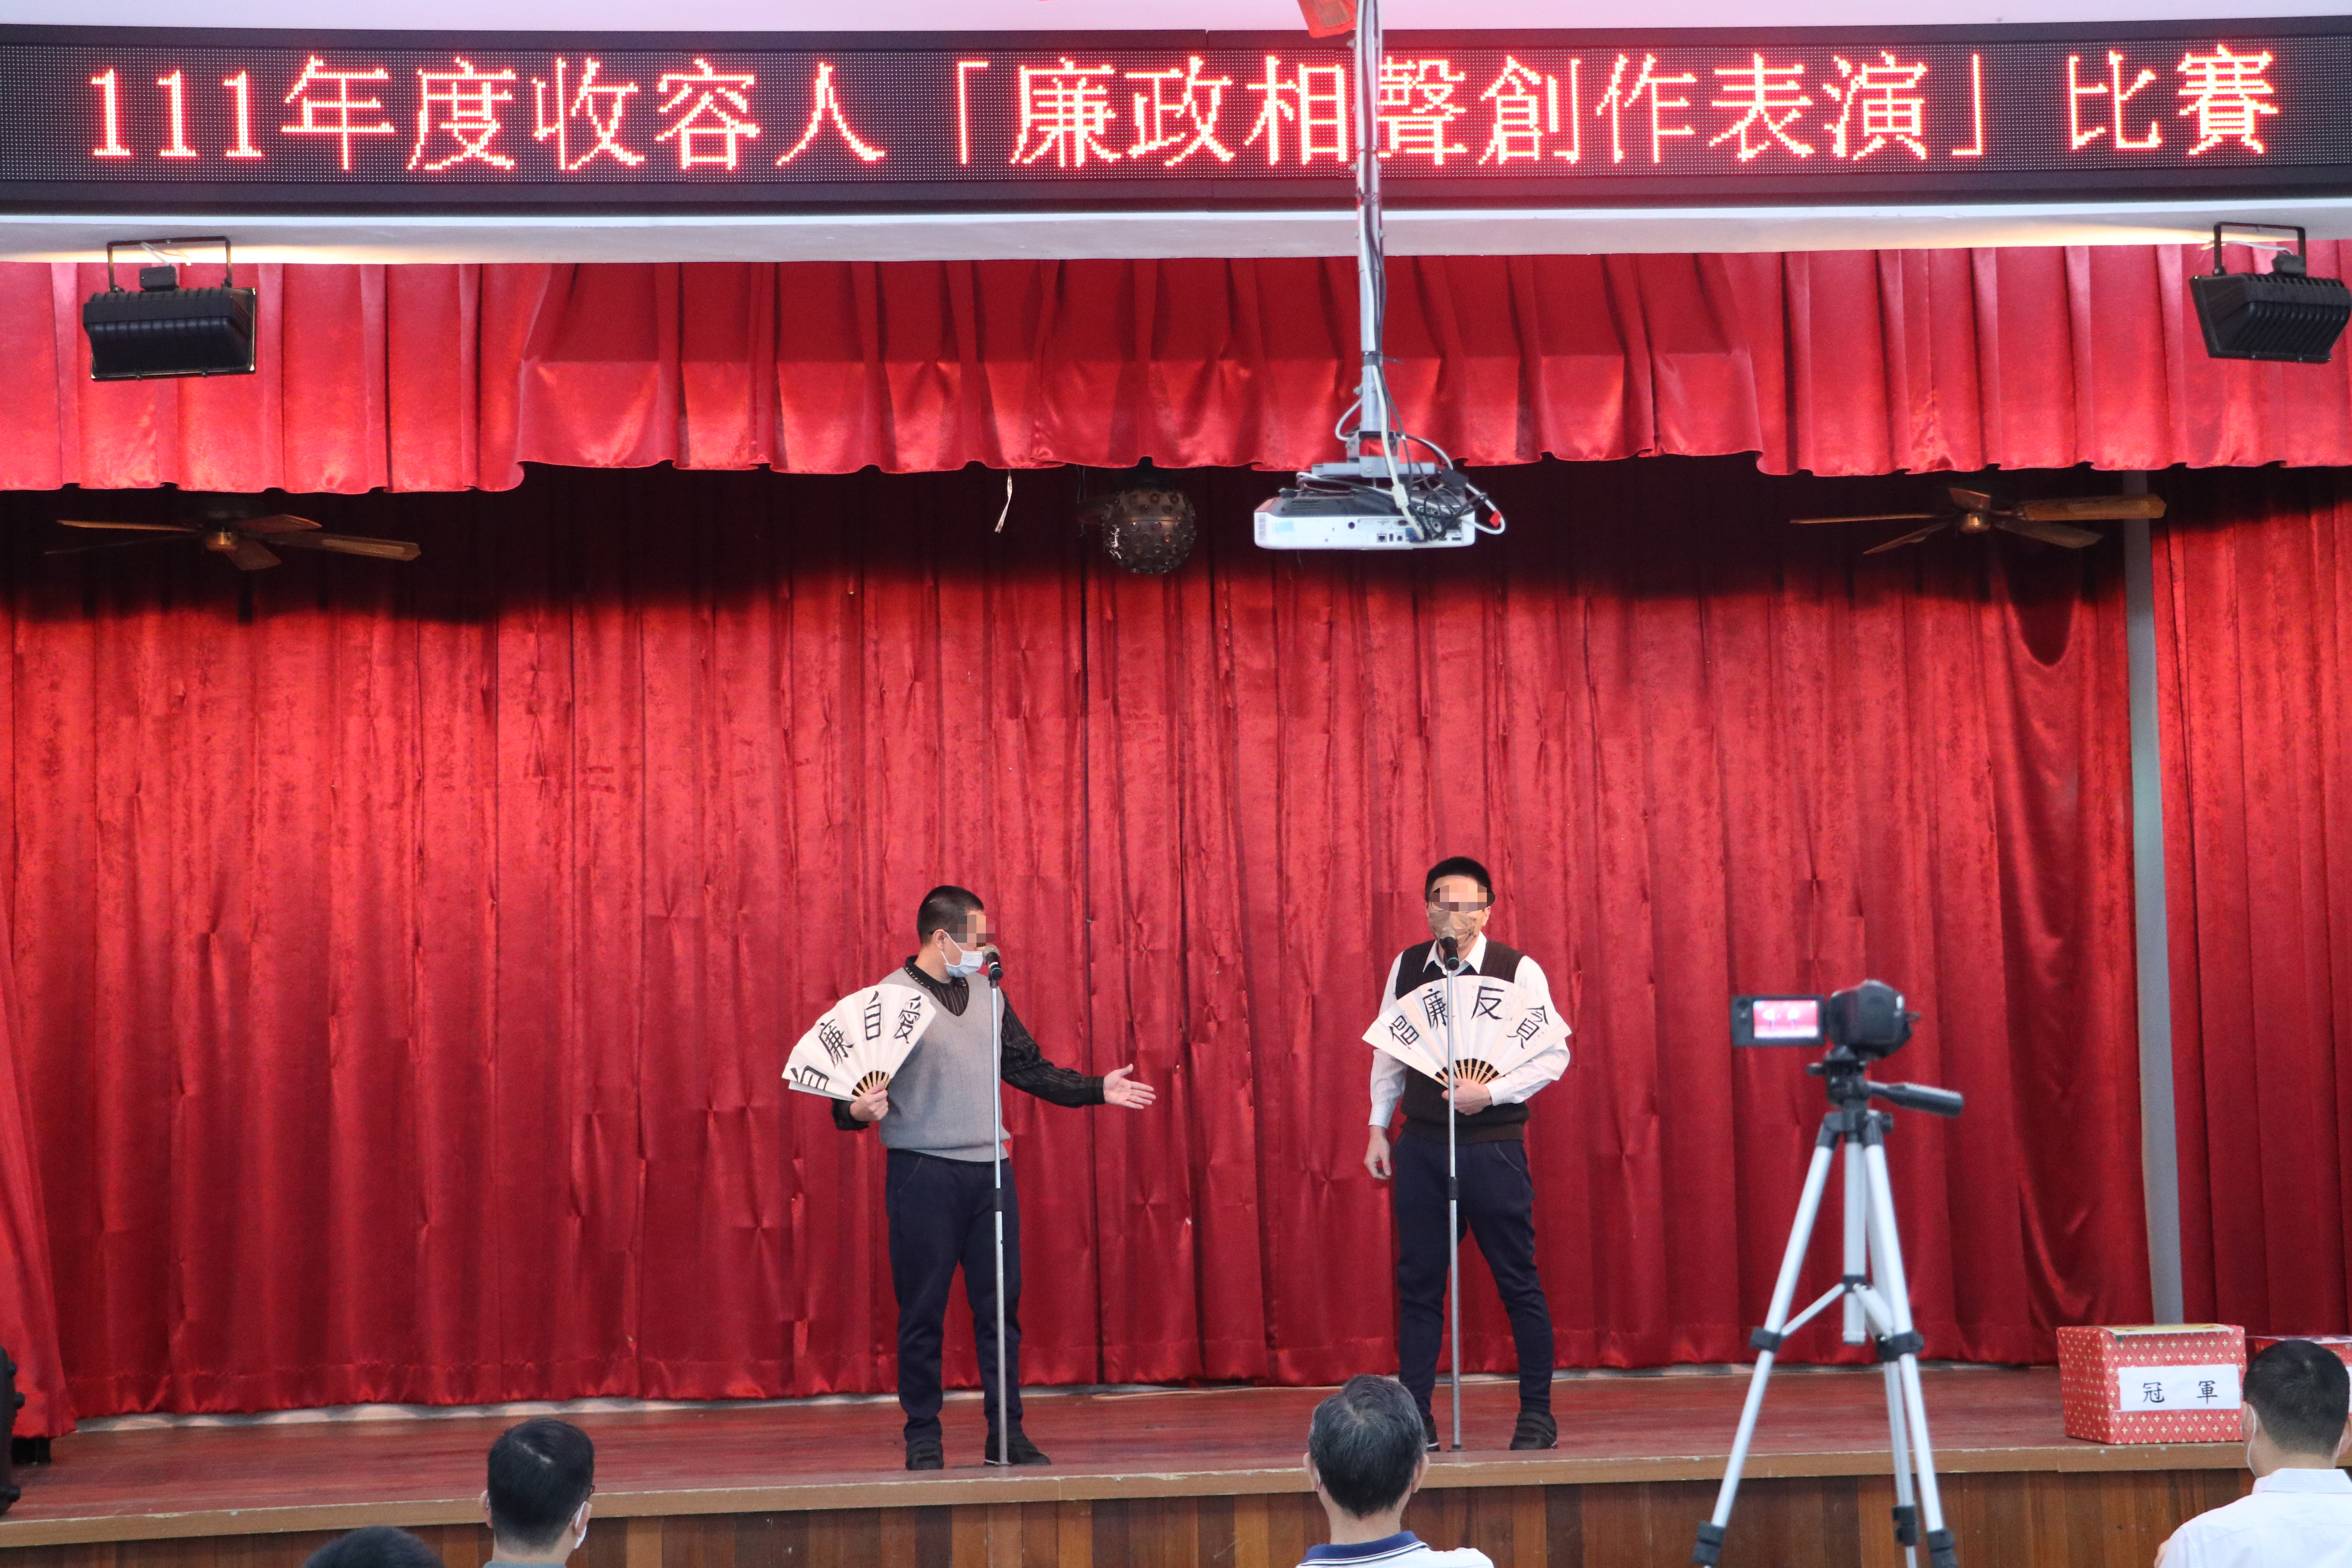 The inmates performed on stage